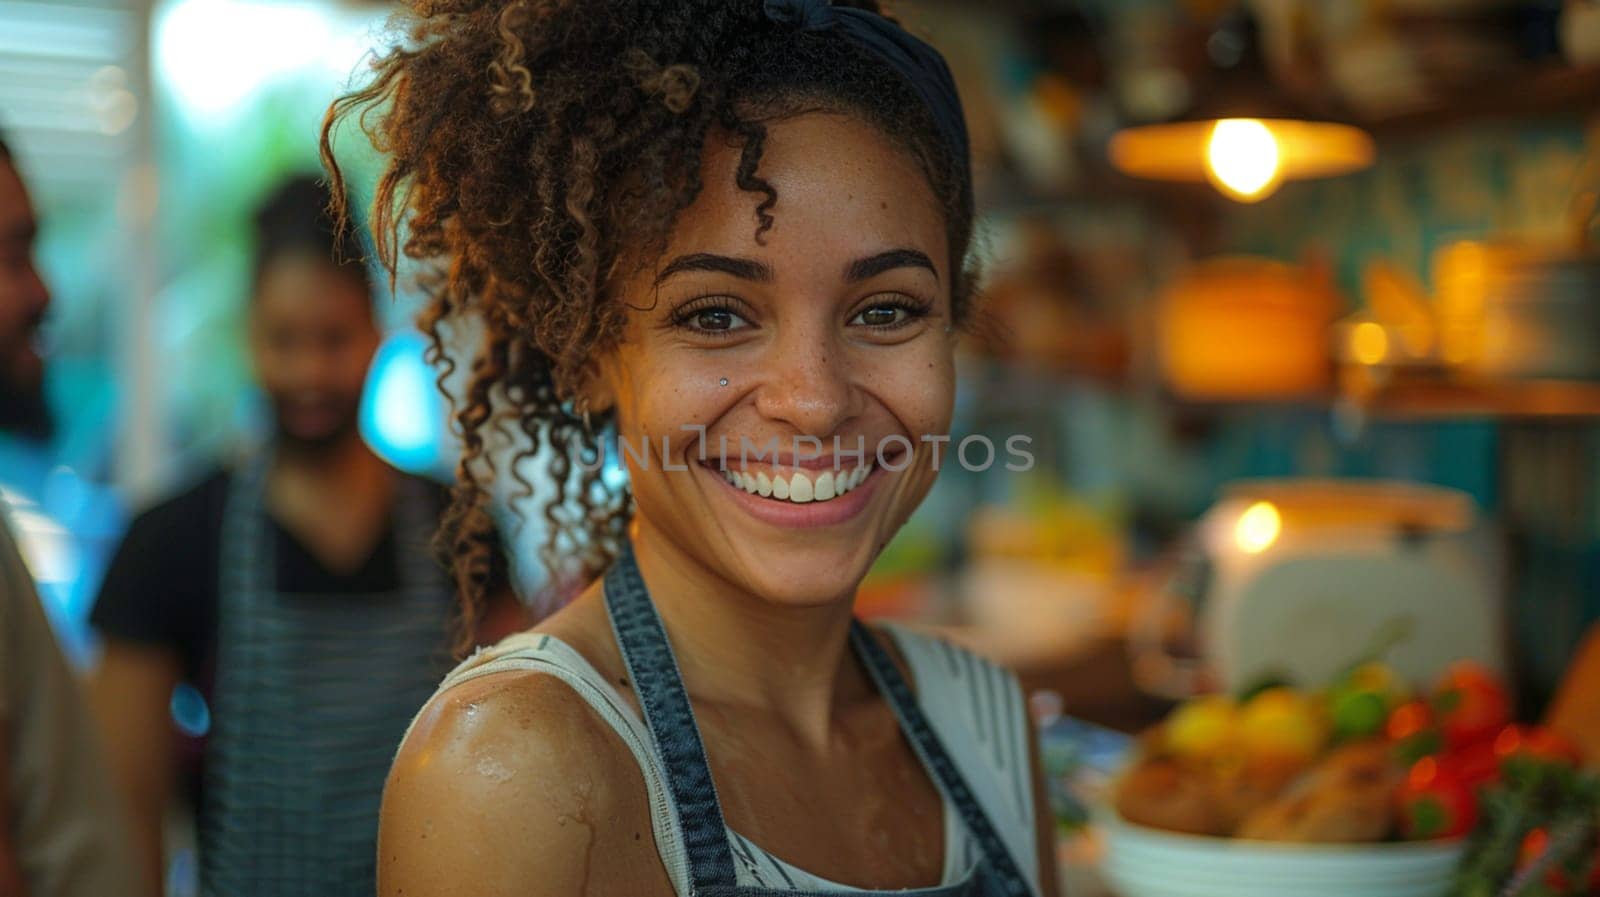 A woman with curly hair is smiling and holding a bowl of food by verbano